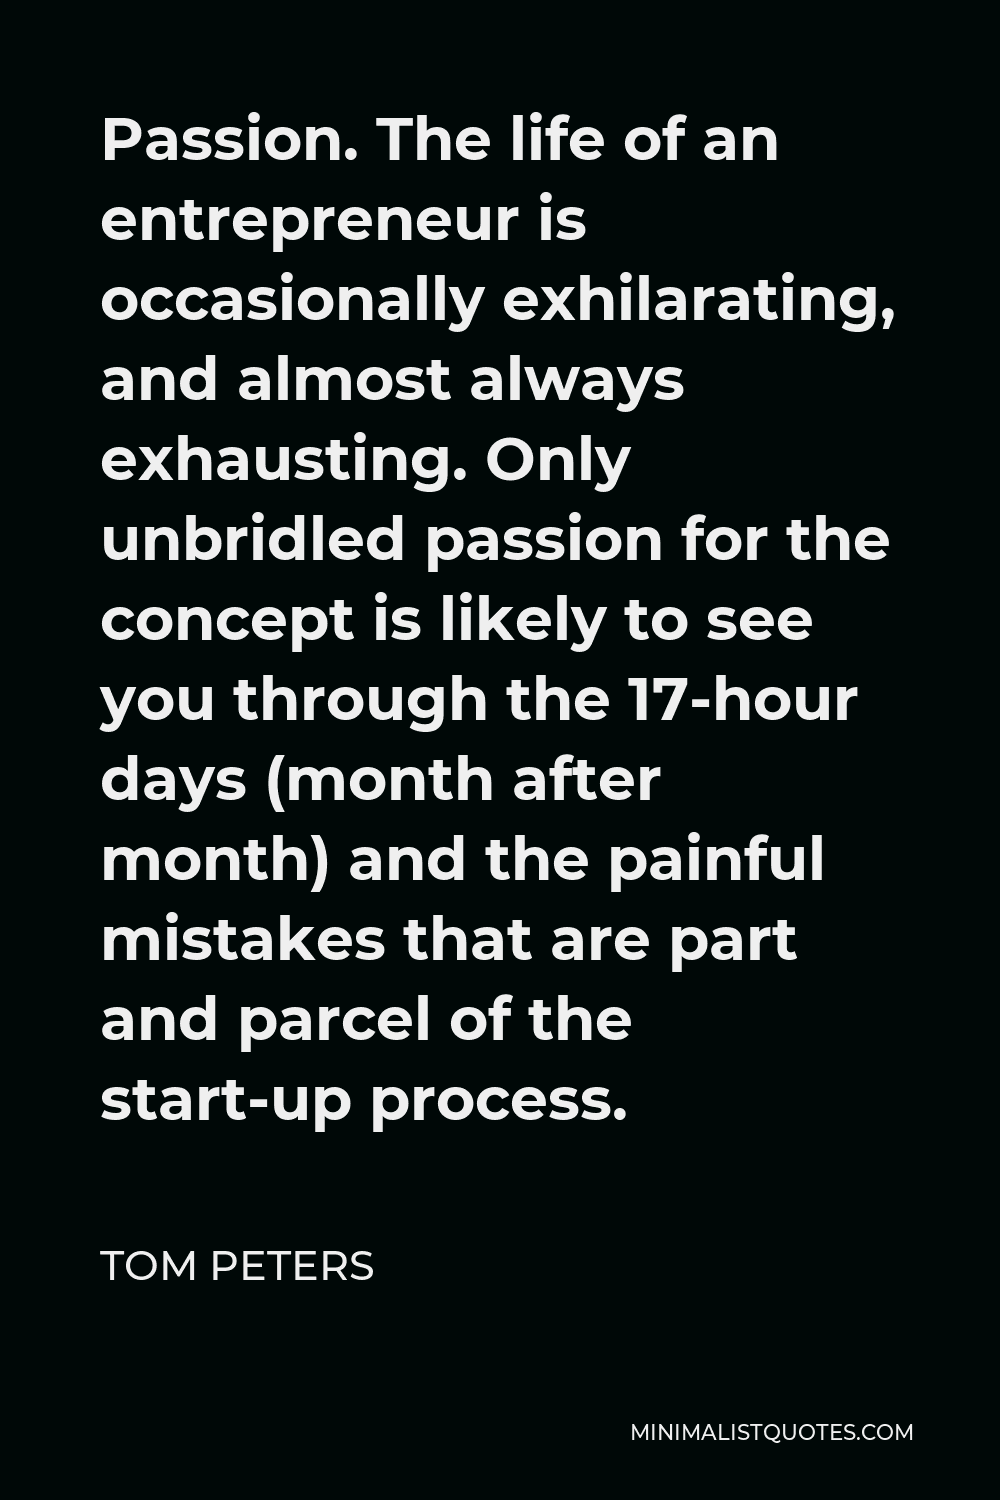 Tom Peters Quote - Passion. The life of an entrepreneur is occasionally exhilarating, and almost always exhausting. Only unbridled passion for the concept is likely to see you through the 17-hour days (month after month) and the painful mistakes that are part and parcel of the start-up process.